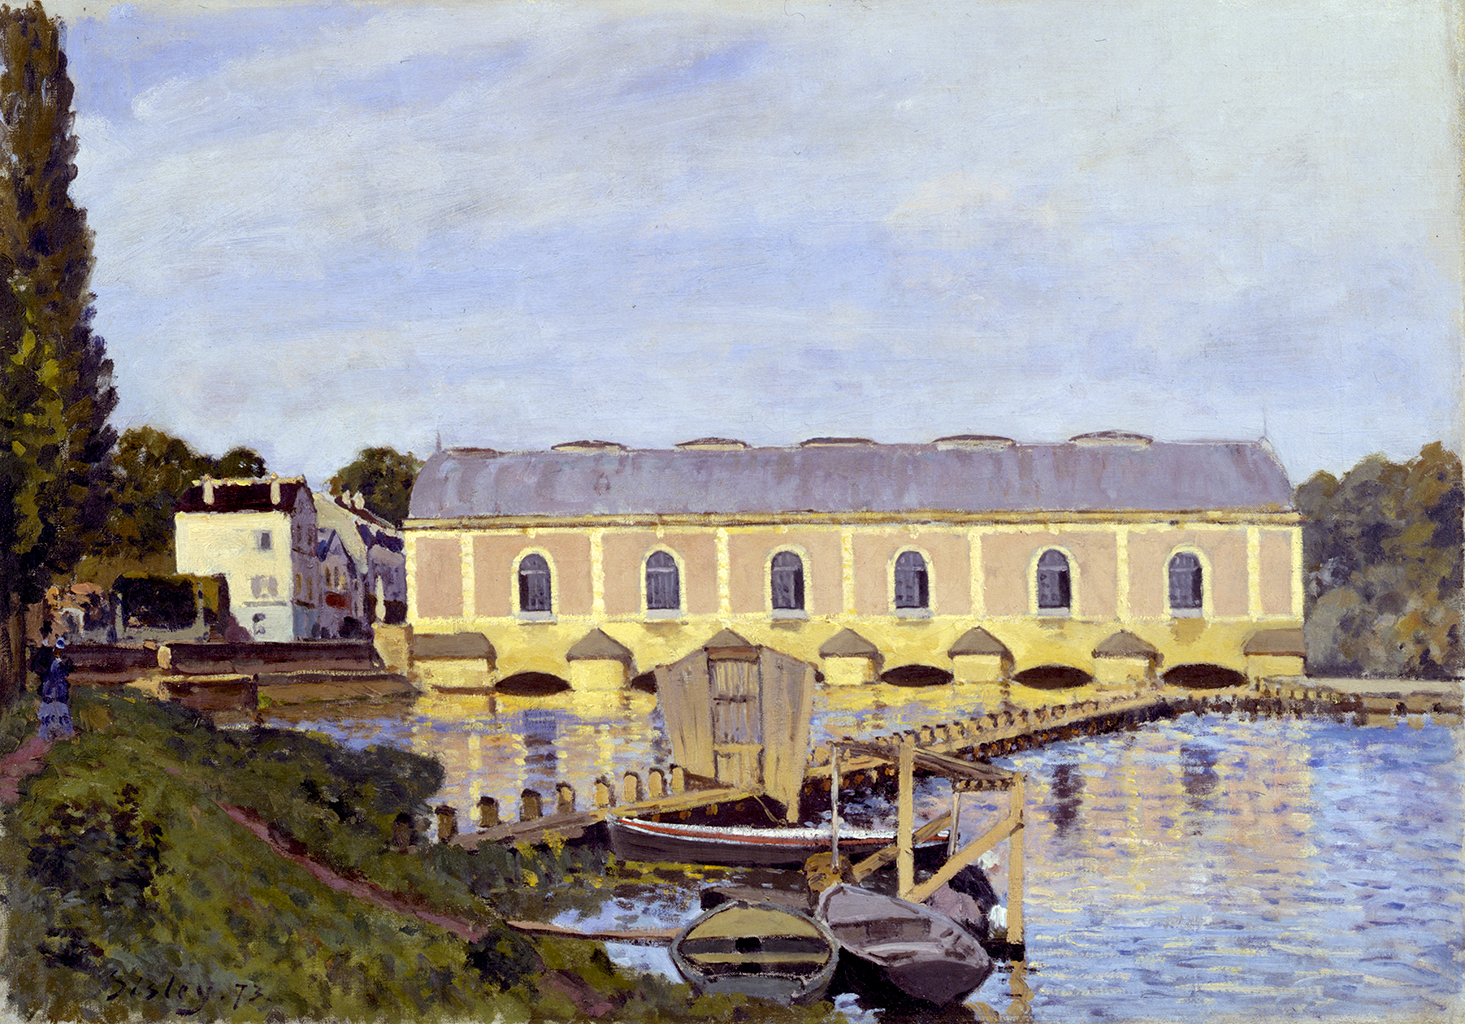 A painting of three small wooden boats in a river while a thin wooden bridge crosses over it. The boats rest against a bank covered in green grass with a brown trail. Behind the wooden bridge, there is a long yellow building with six windows. Behind it, there are white buildings that leads to a small town. The sky above is light blue.